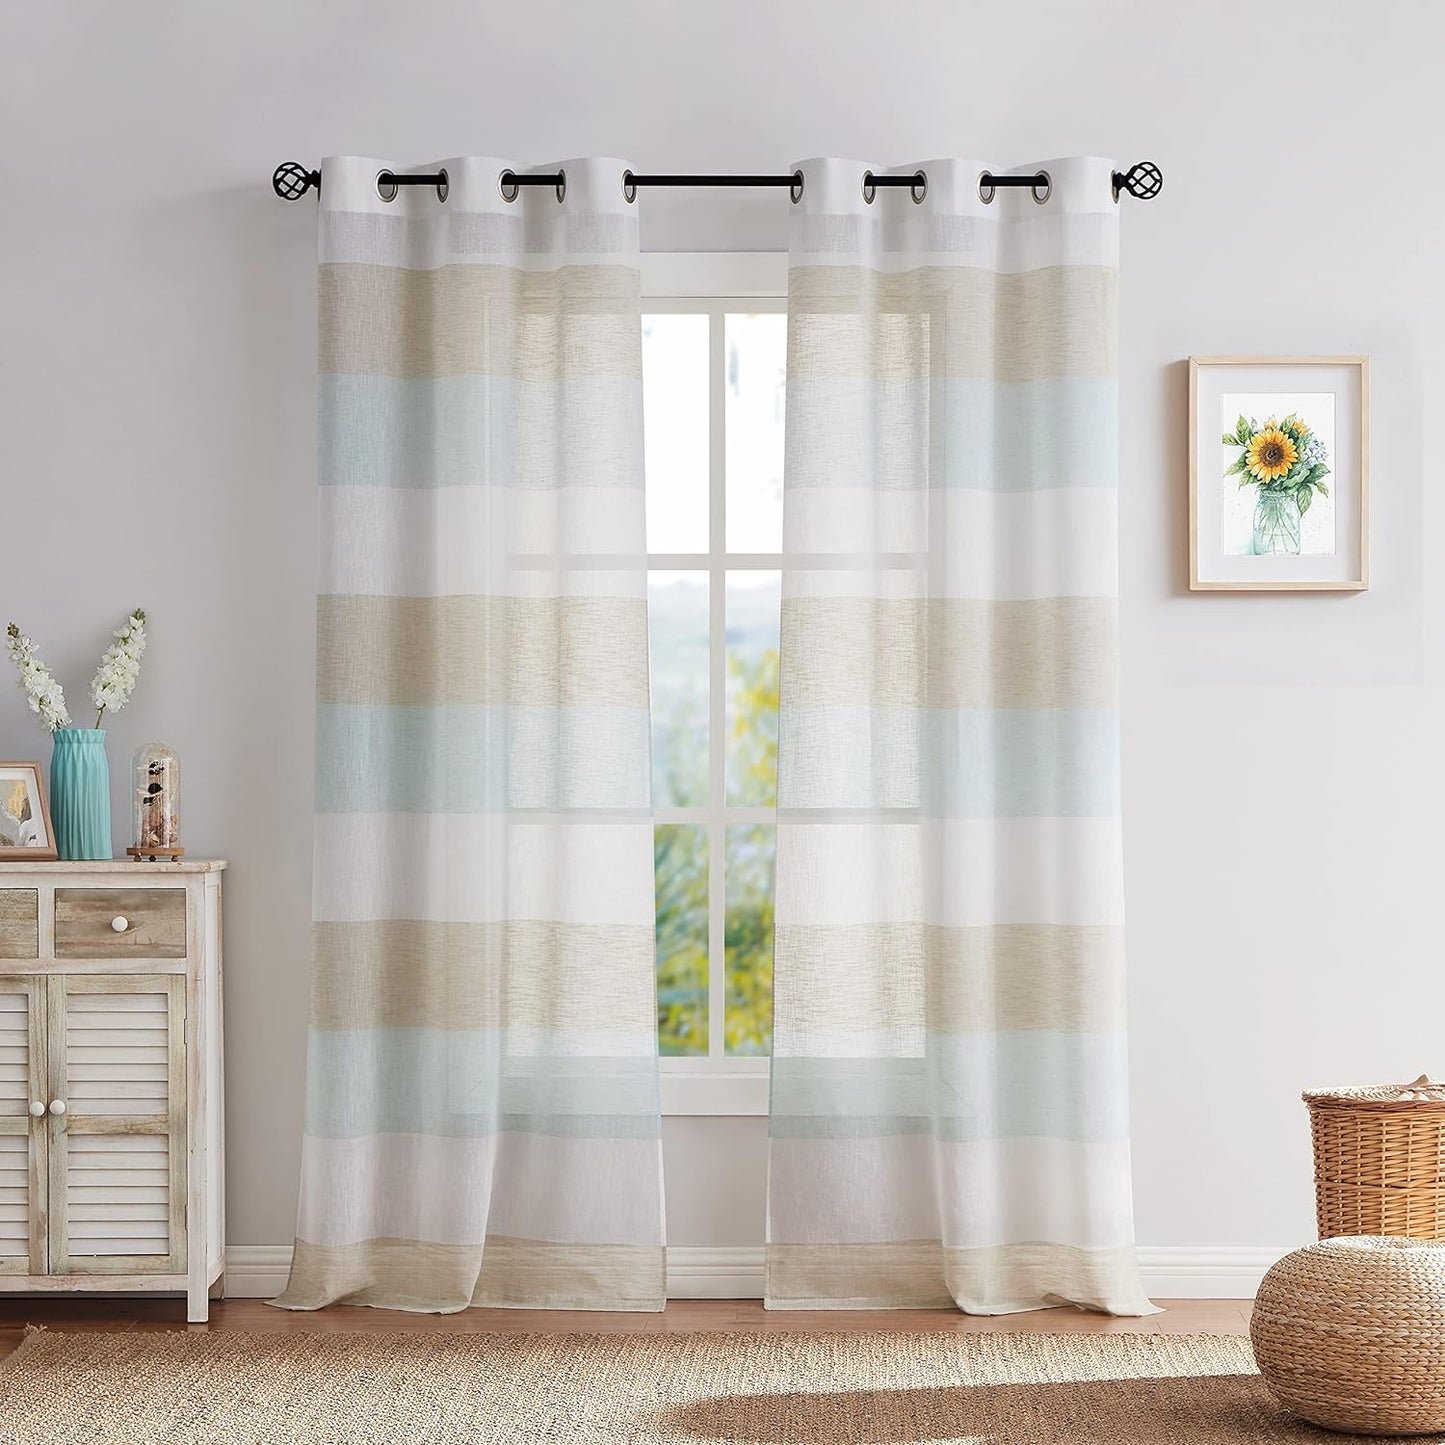 Central Park Gray Tan Stripe Sheer Color Block Window Curtain Panel Linen Window Treatment for Bedroom Living Room Farmhouse 84 Inches Long with Grommets, 2 Panel Rustic Drapes  Central Park Tan/Spa Blue 40"X63"X2 